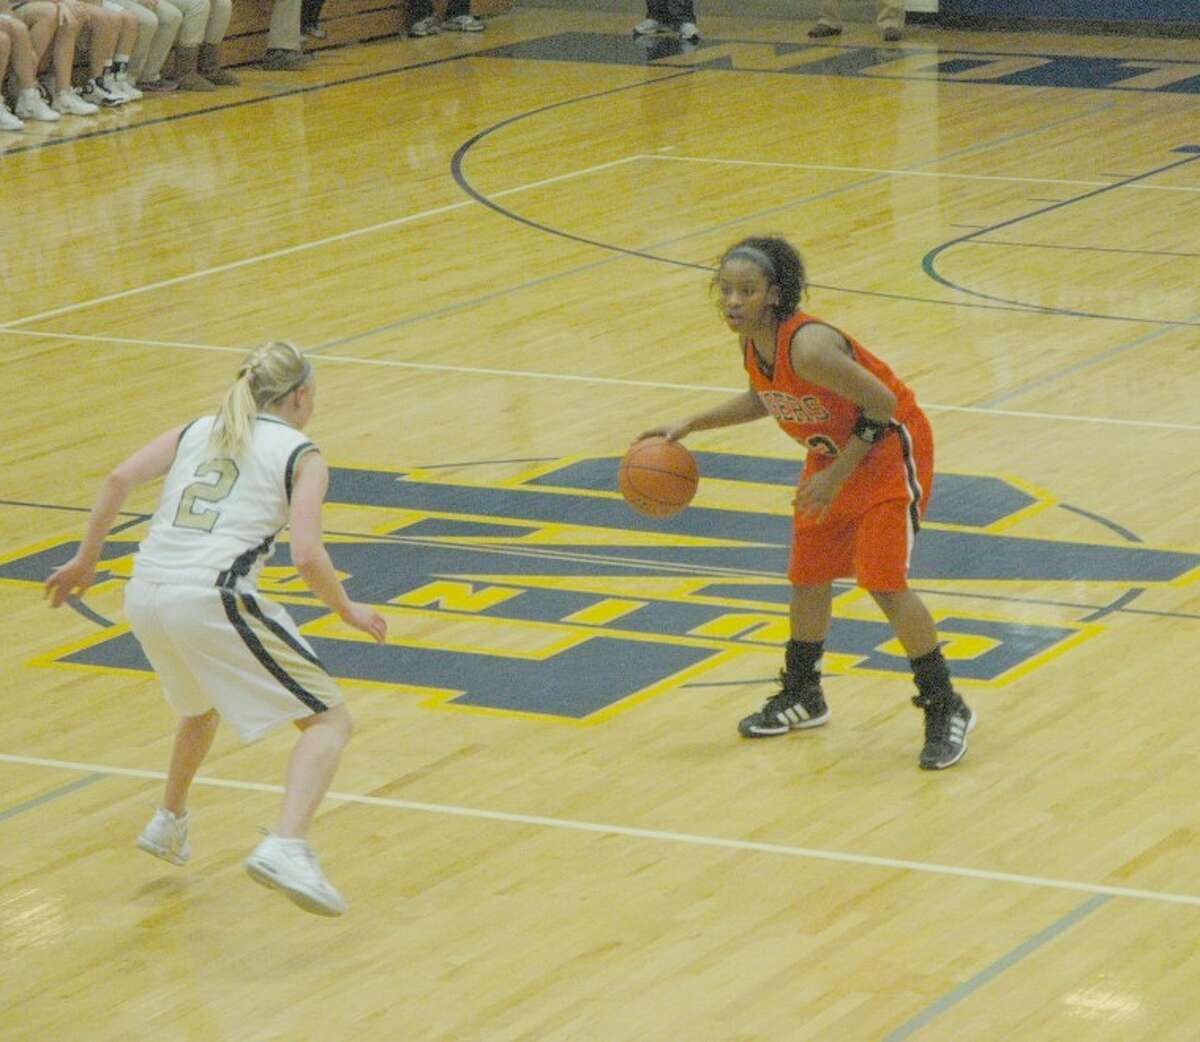 Edwardsville's Lauren White sets up the offense with Quincy Notre Dame's Shannon Foley watching her closely.